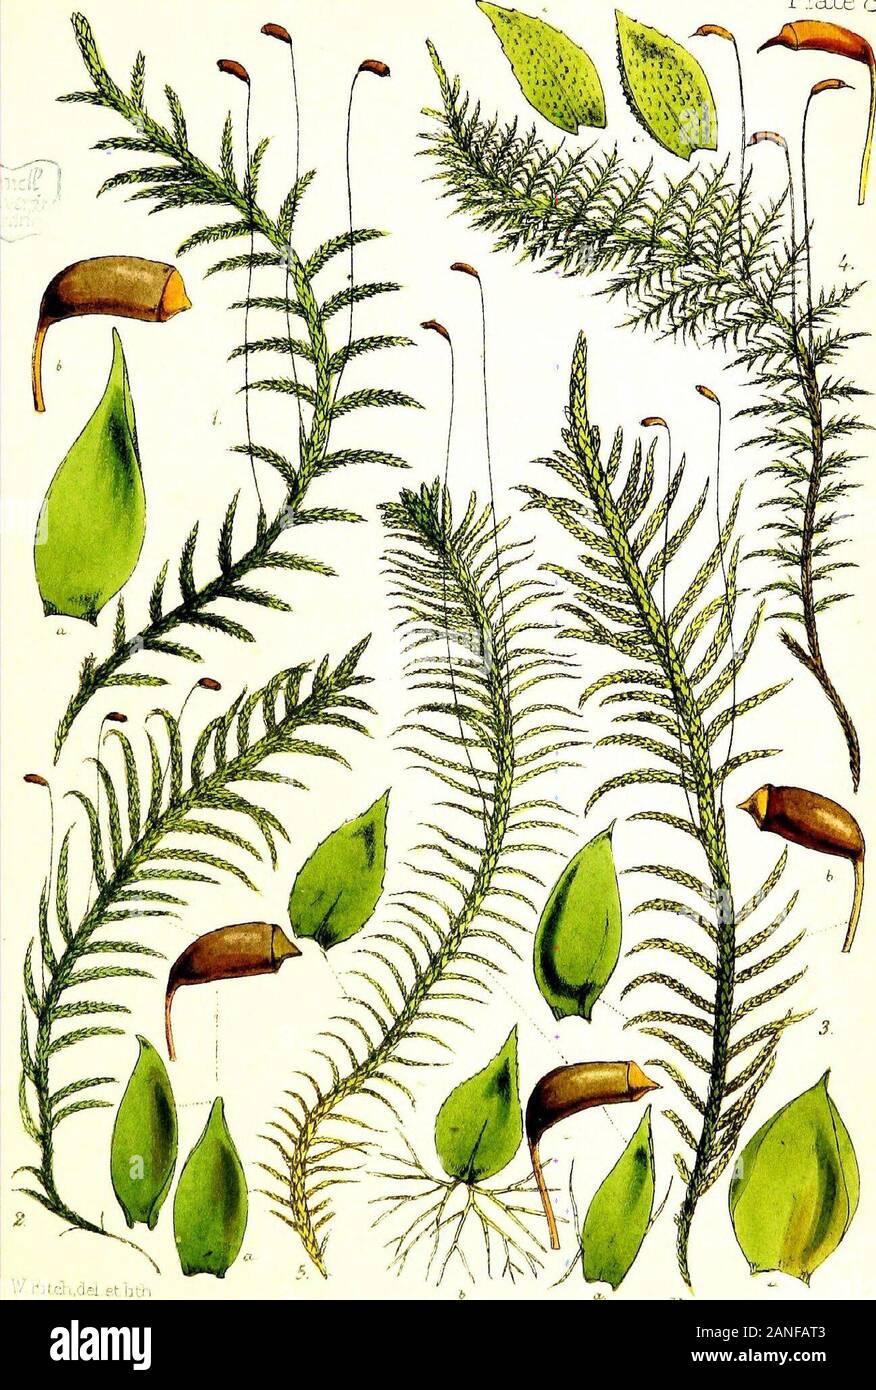 Handbook of British mosses; comprising all that are known to be natives of the British Isles . PLATE VIII. 1. Hypnum cuspidatum. a. leaf, magnified. 6. sporangium, magnified. 2. H. Schreberi. a. leaves, from before and behind, magnified. b. sporangium, magnified. 3. H. purum. a. leaves, from before and behind, magnified. b. sporangium, magnified. 4. Thuidium tamariscinum. a. leaves, magnified. b. sporangium, magnified. 5. Hypnum Blandovii. a. leaf, magnified. b. leaf, seen from behind, with down-like paraphylla c. sporangium, magnified. Plale 8.. W raid,,dei et lit Vincent Broolra, Imp PLATE I Stock Photo